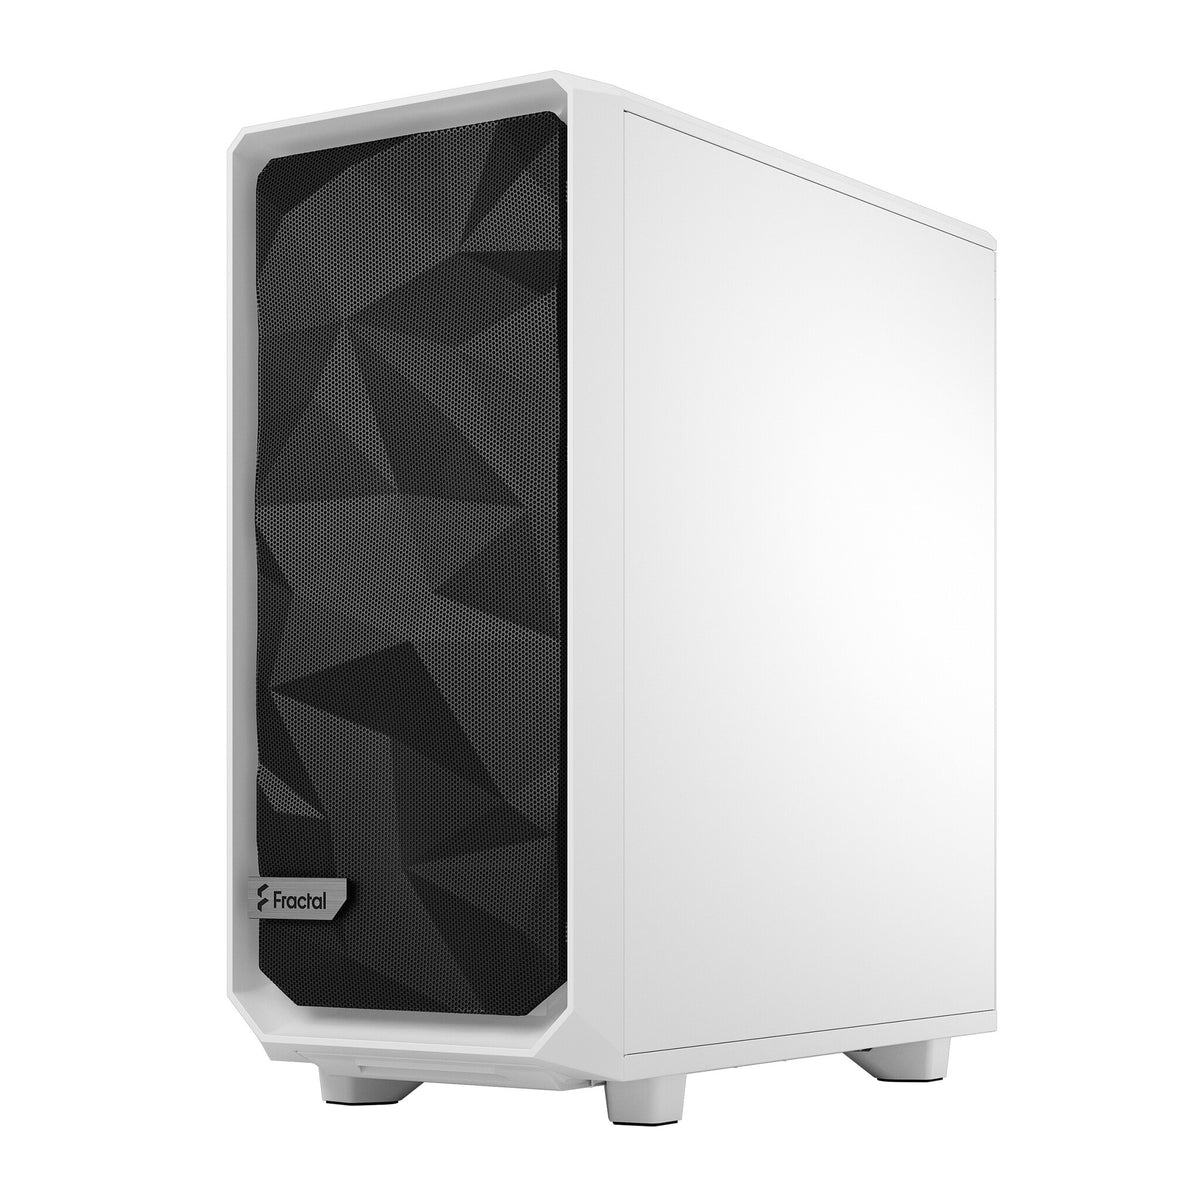 Fractal Design Meshify 2 Compact - ATX Mid Tower Case in White / TG Clear Tint